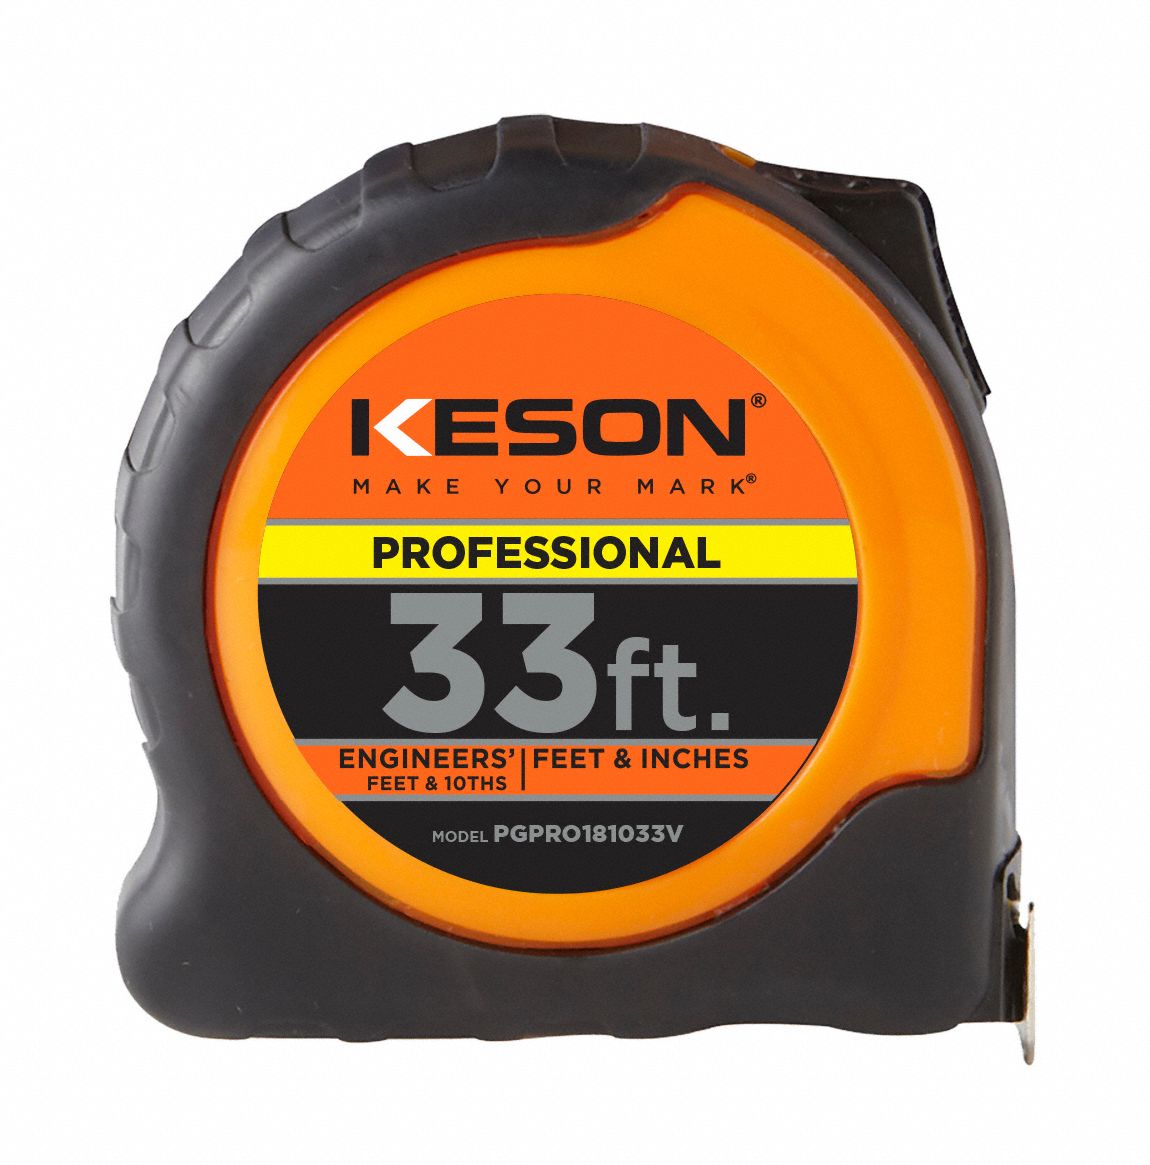 Keson 33ft Engineers and SAE Measuring Tape - Measuring Tools